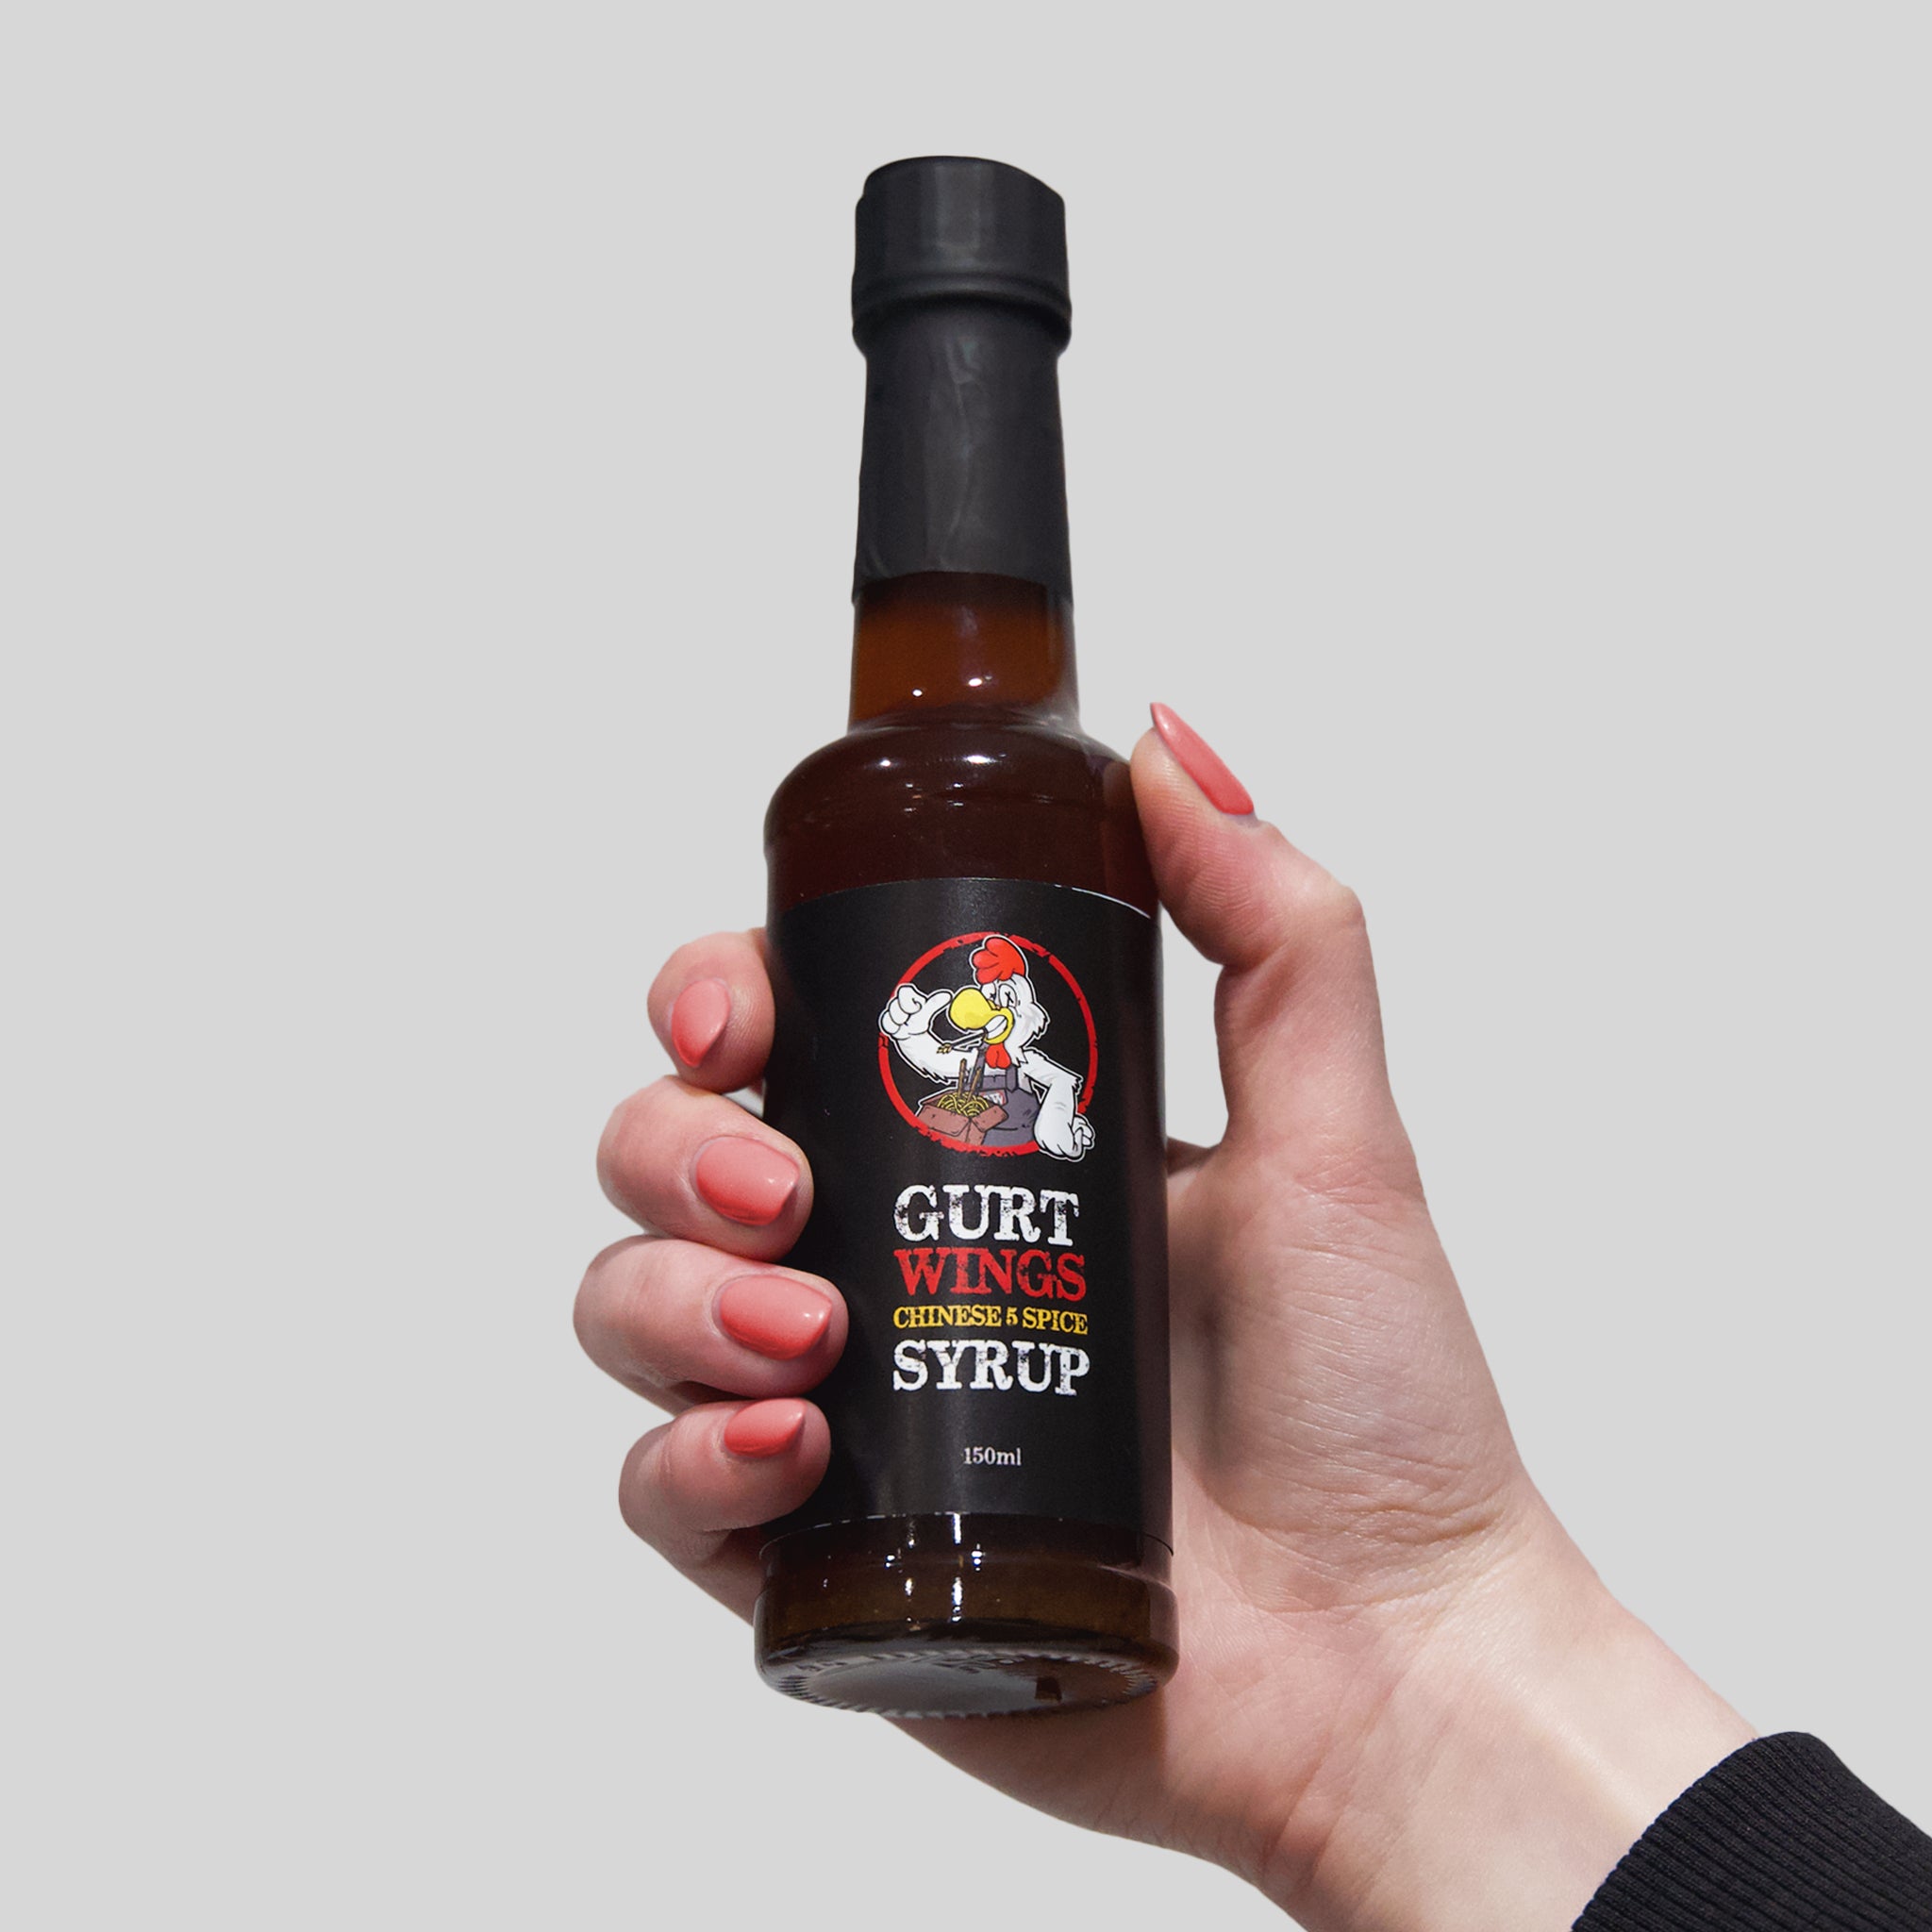 gurt wings chinese 5 spice syrup